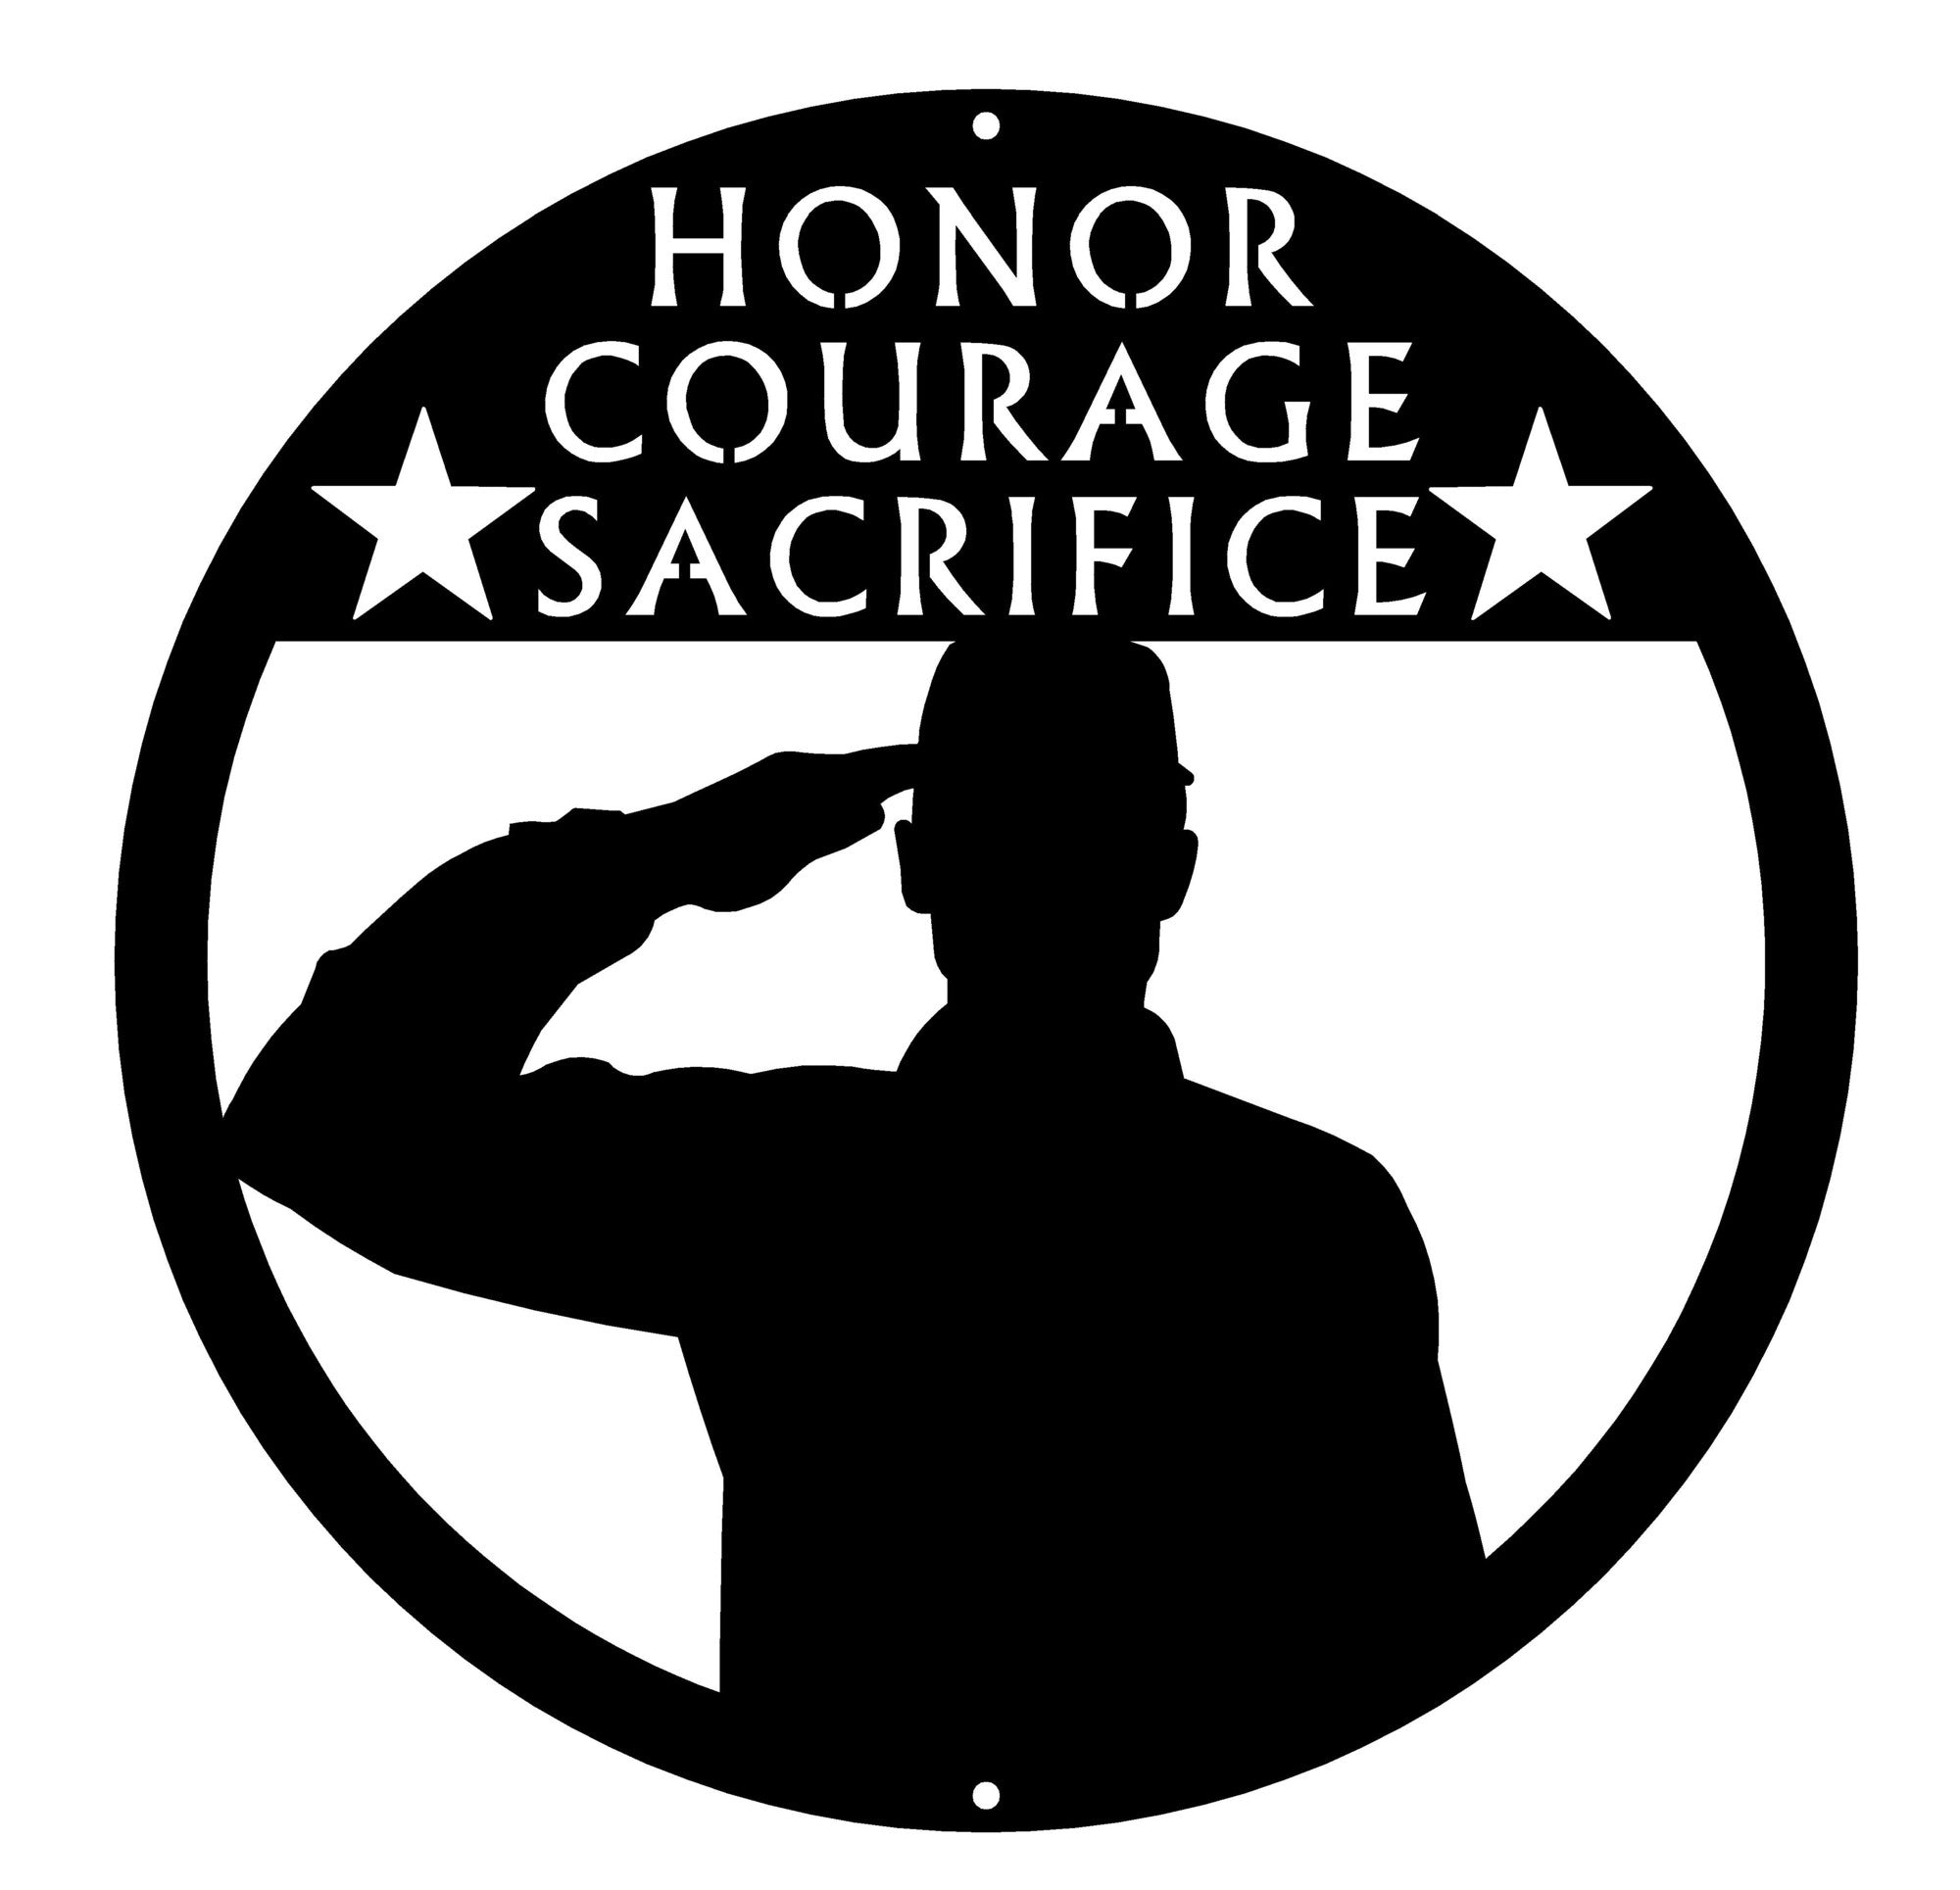 Round Saluting Soldier - Honor Courage Sacrifice Wall Art Sign - The Metal Peddler Wall Art armed forces, army, dad, hero, military, round signs, signs, soldier, veteran, wall art, wall decor